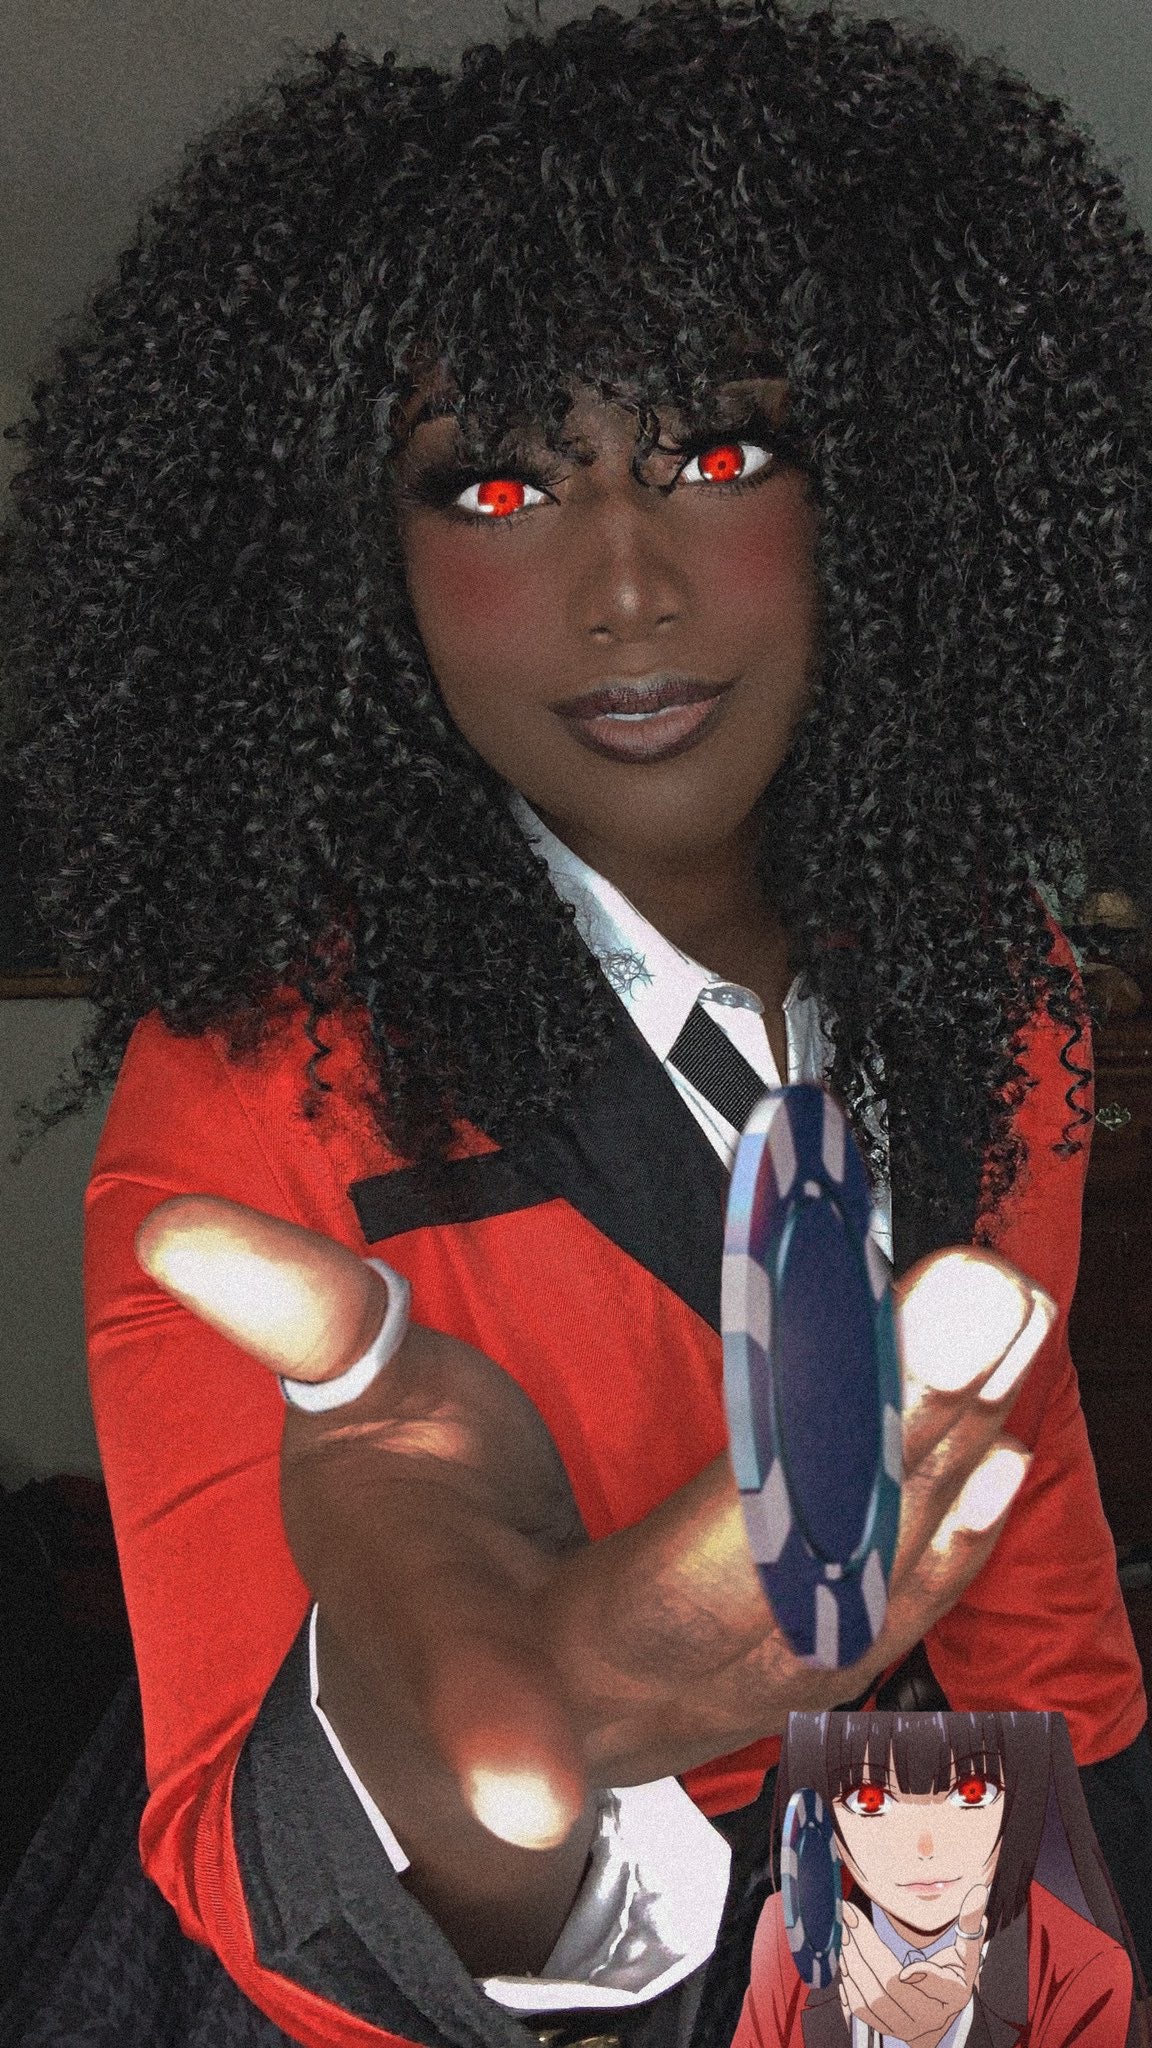 Black Anime Cosplayers Discuss Representation In Anime | Cosplay Central